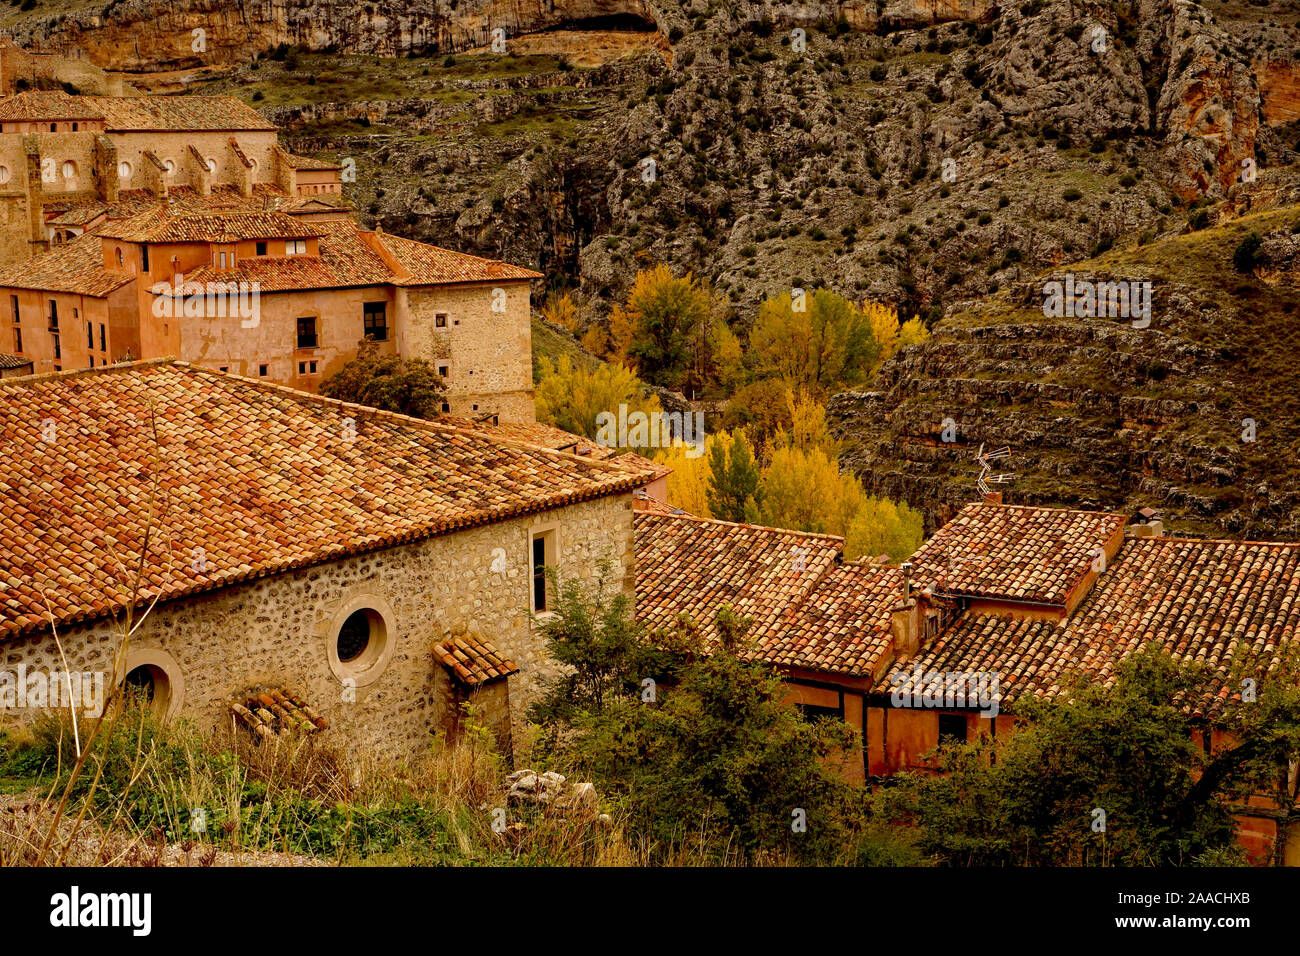 The rooftops of Albarracin, an old medieval town in the hills of Tereul, Northern Spain Stock Photo